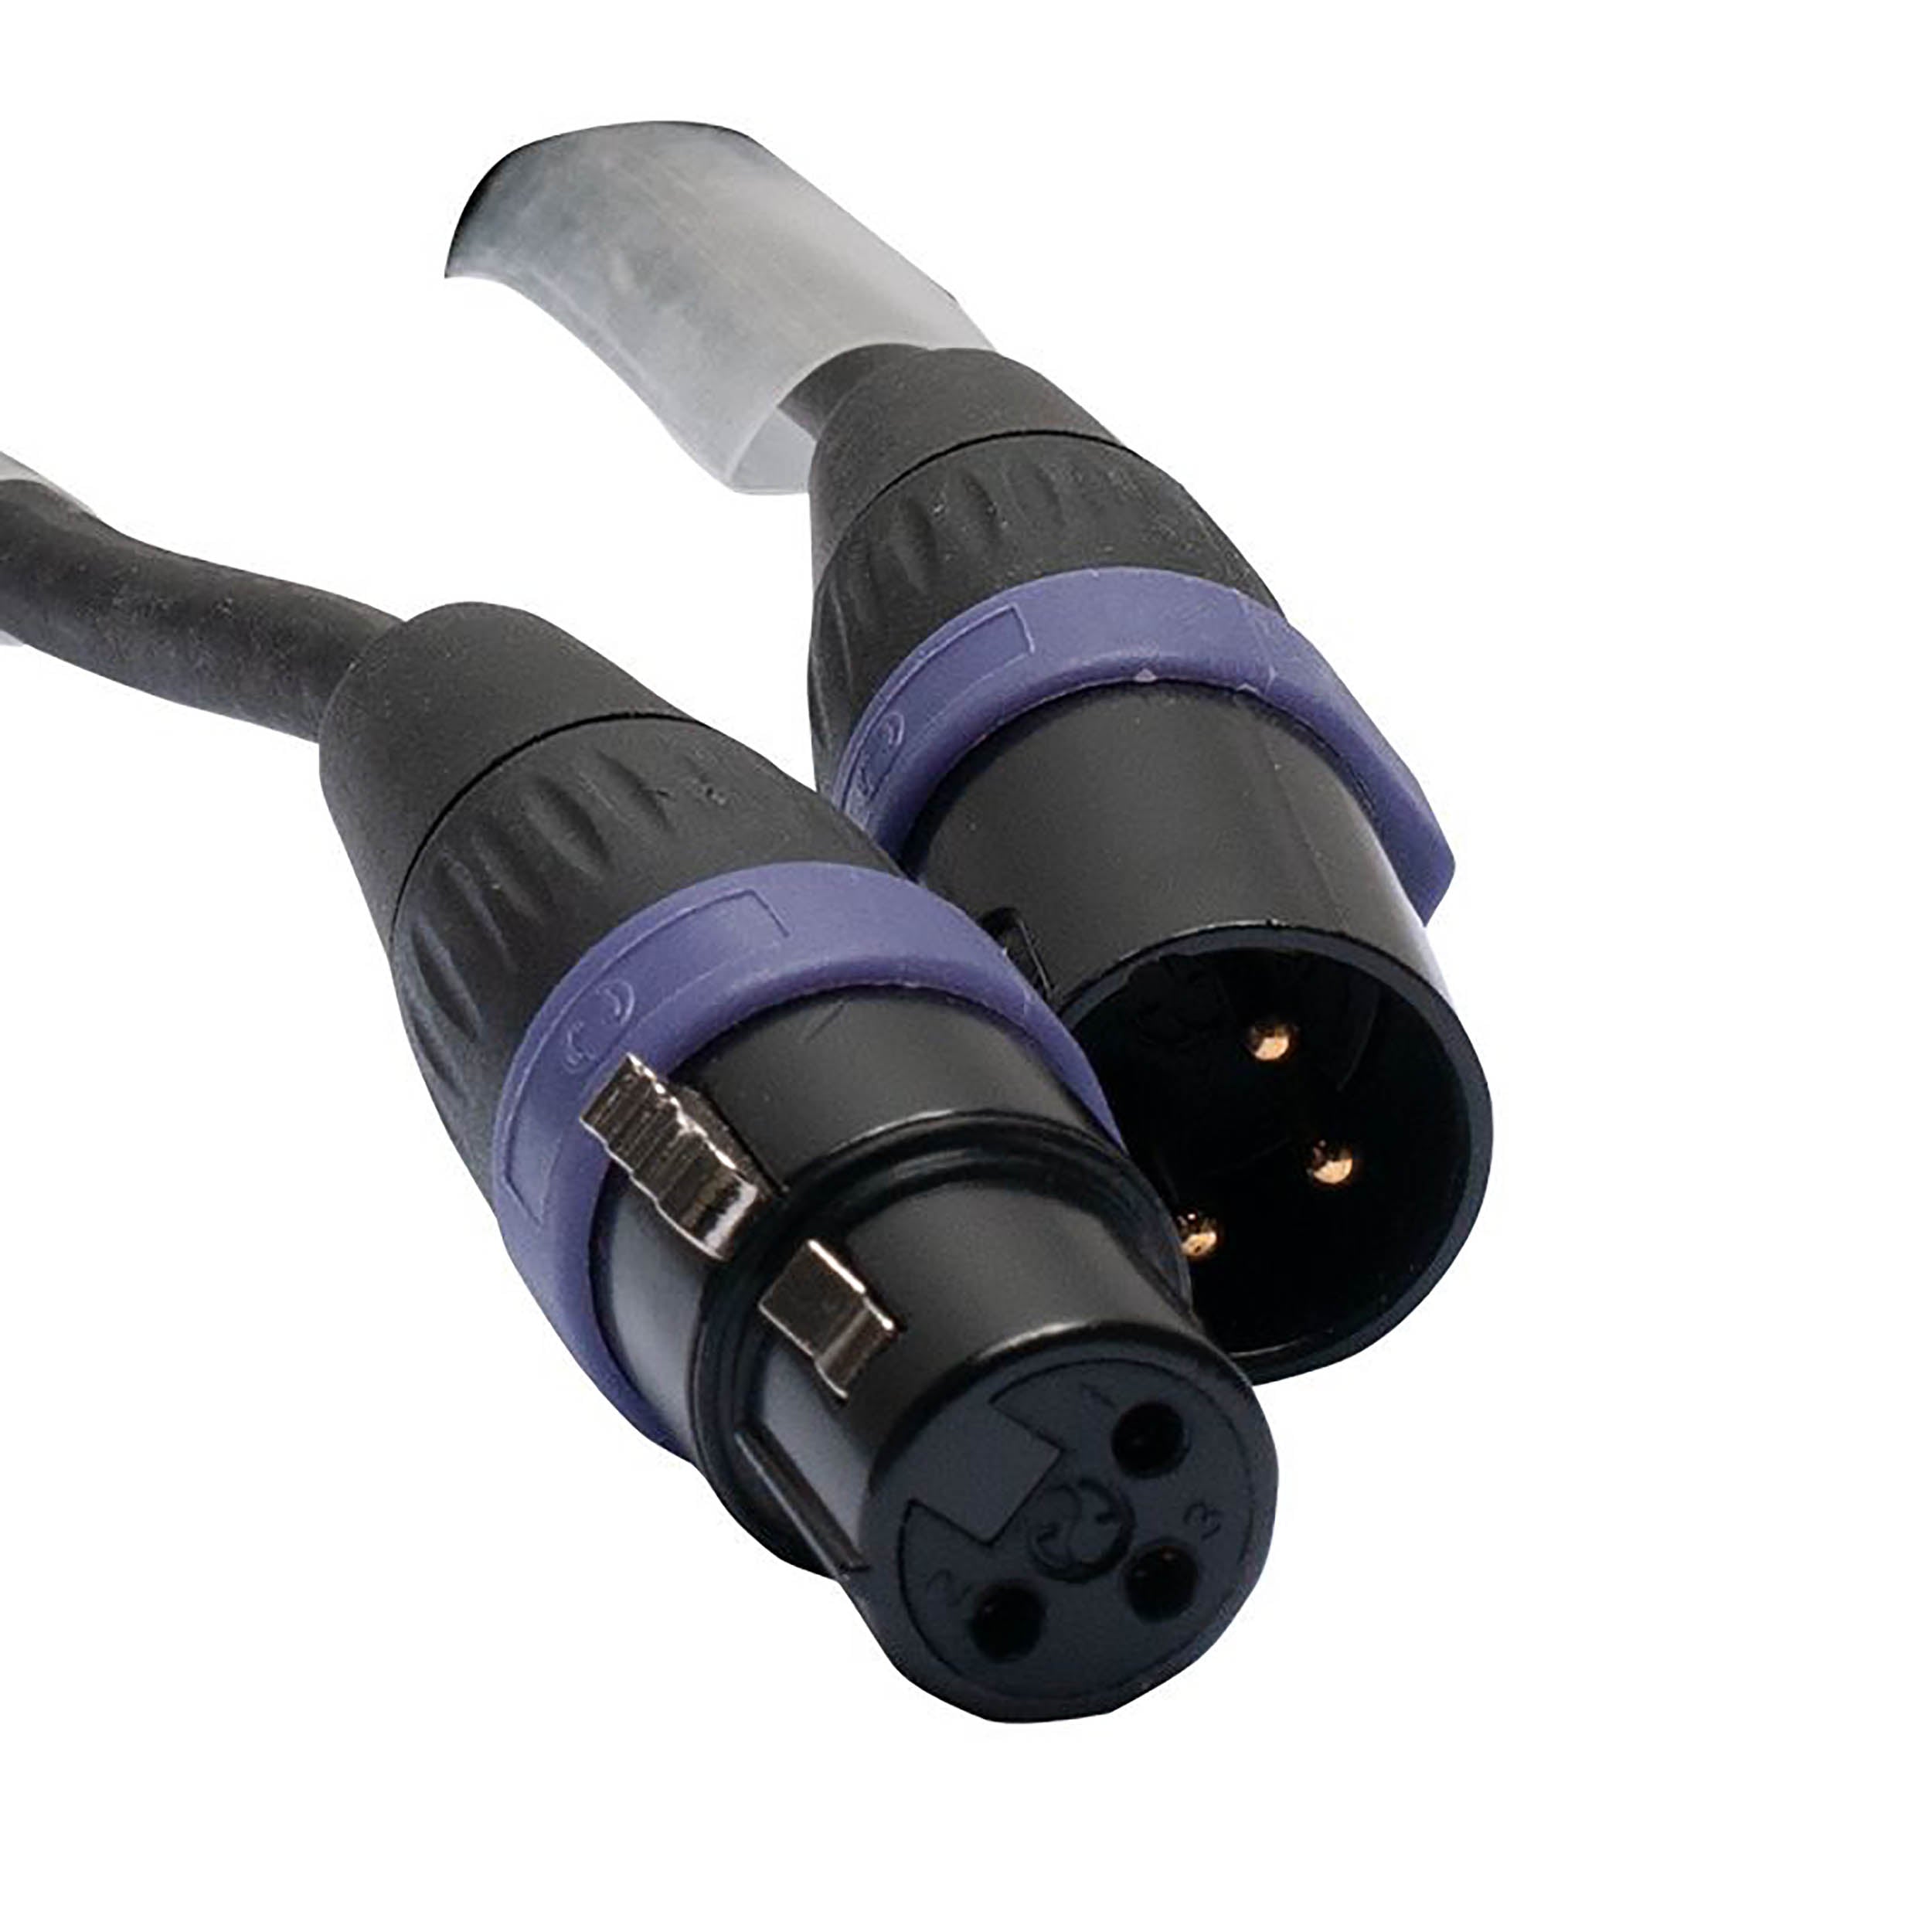 Accu-Cable AC3PDMX100PRO, 3-Pin Male to 3-Pin Female DMX Cable - 100 Ft by Accu Cable